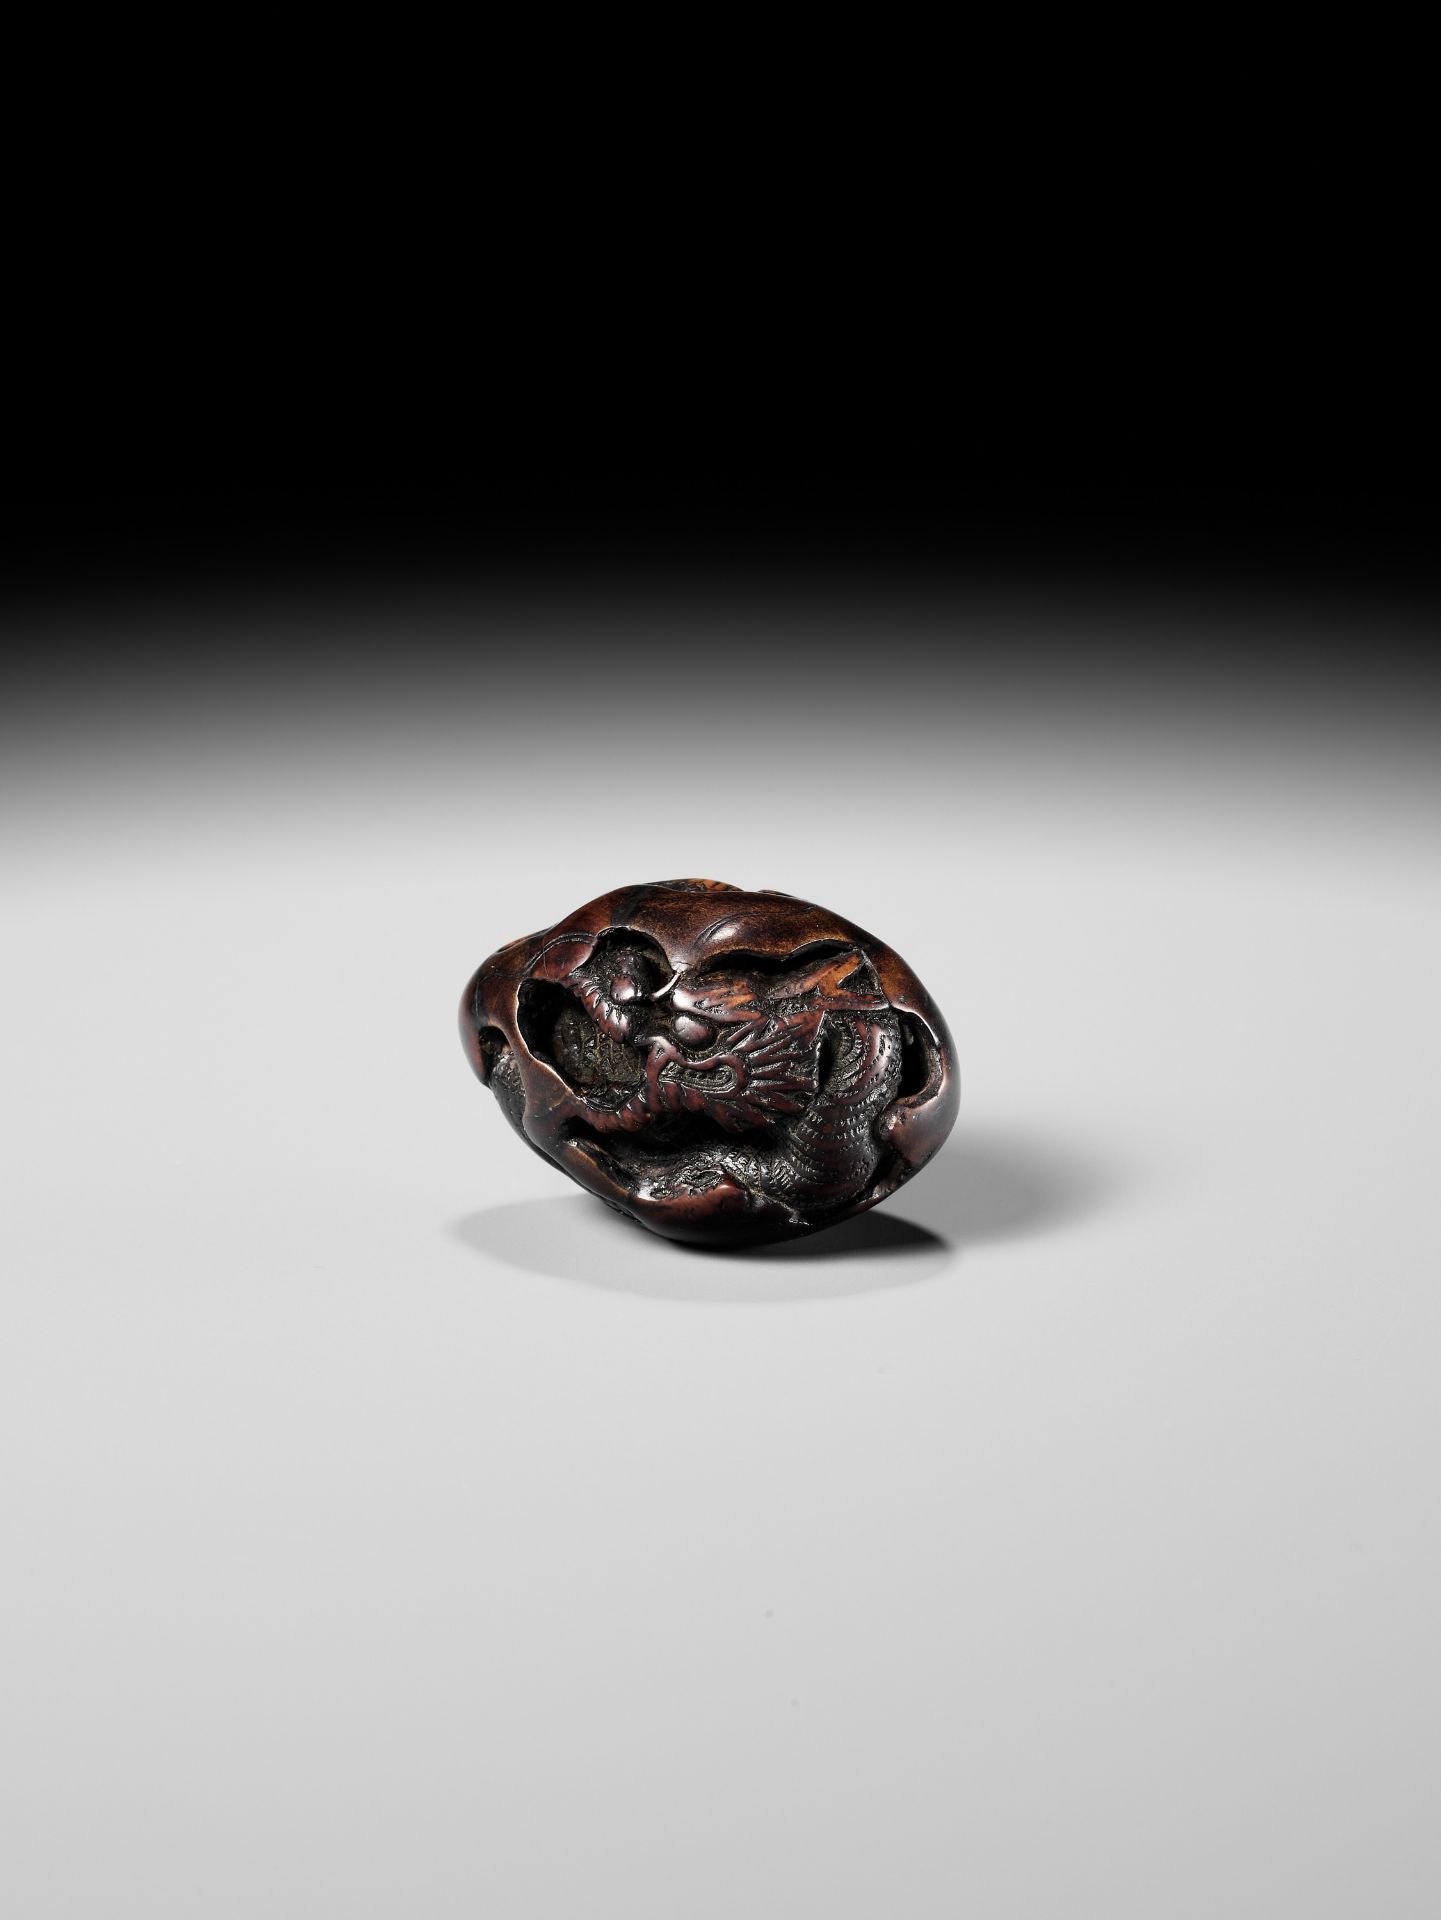 NAITO TOYOMASA: A FINE WOOD NETSUKE OF A DRAGON EMERGING FROM AN EGG - Image 8 of 15